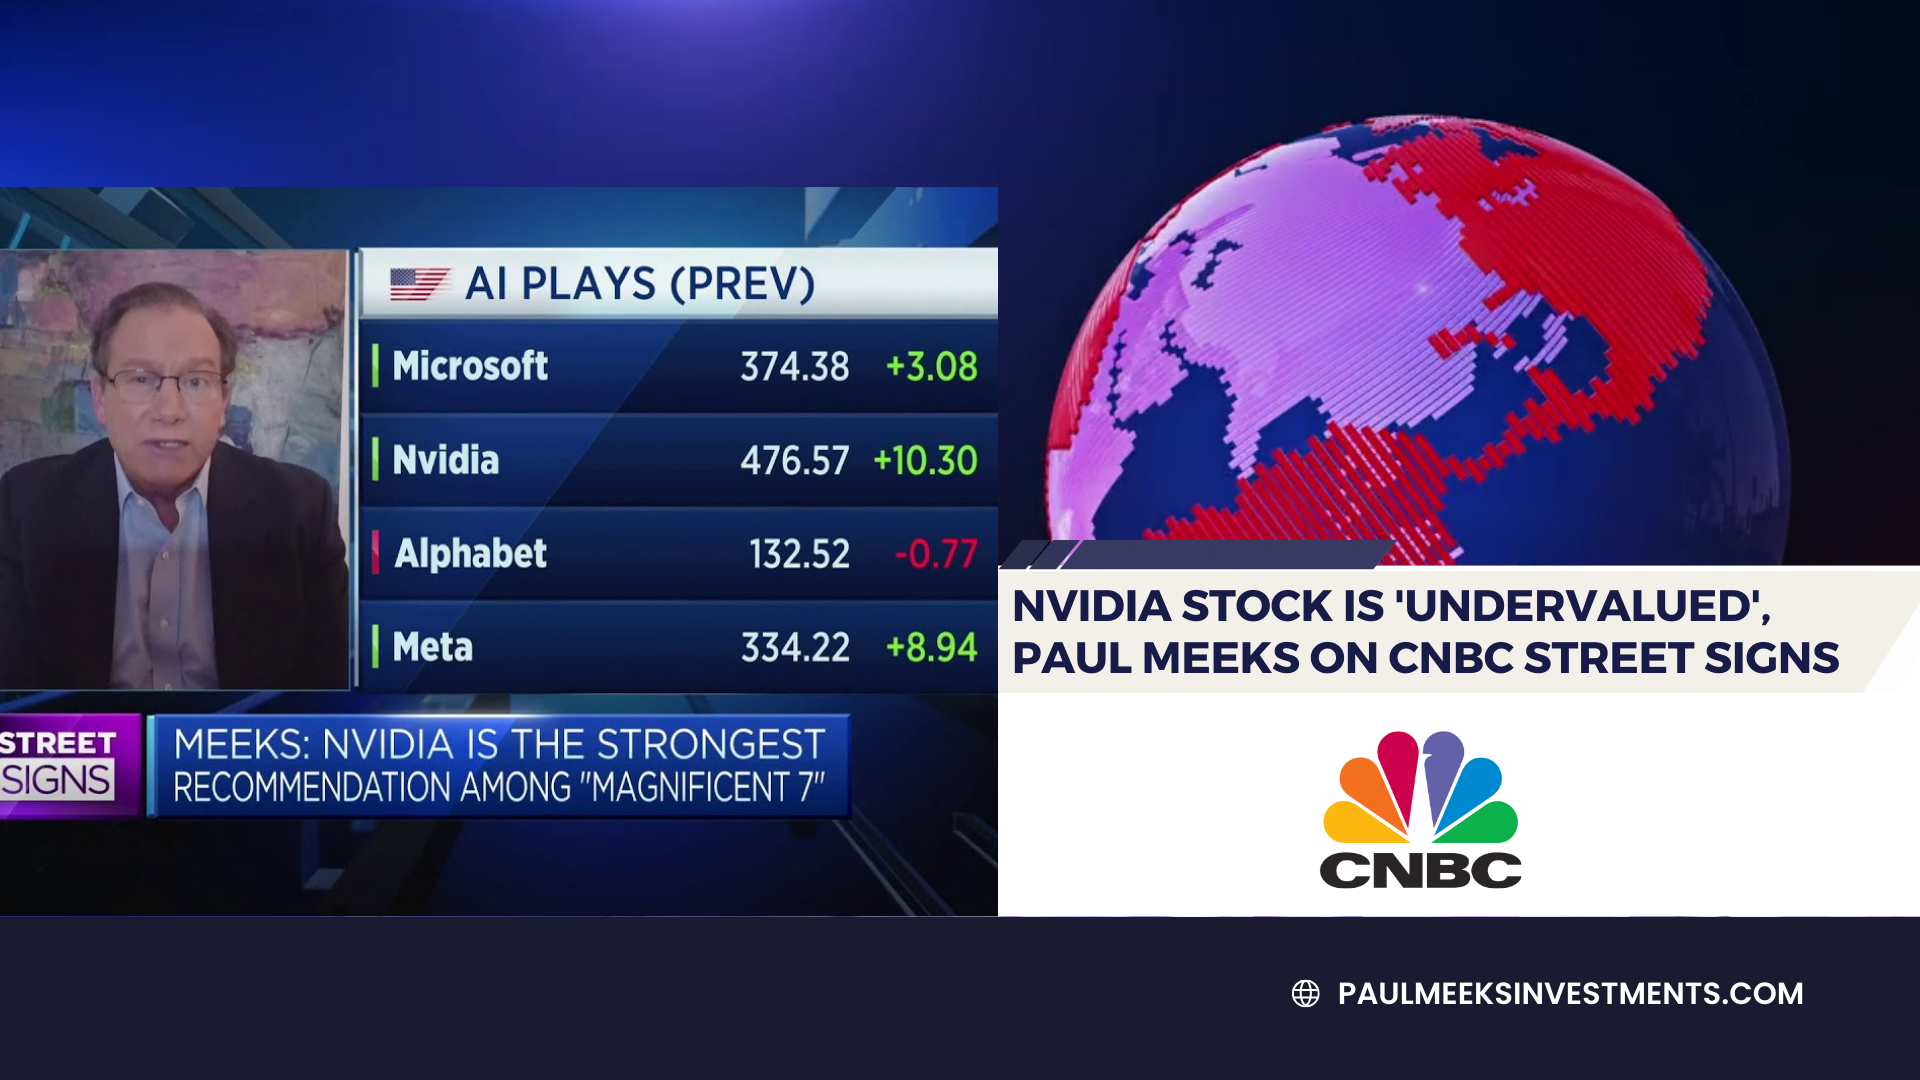 Nvidia Stock is ‘Undervalued’, Paul Meeks on CNBC Street Signs